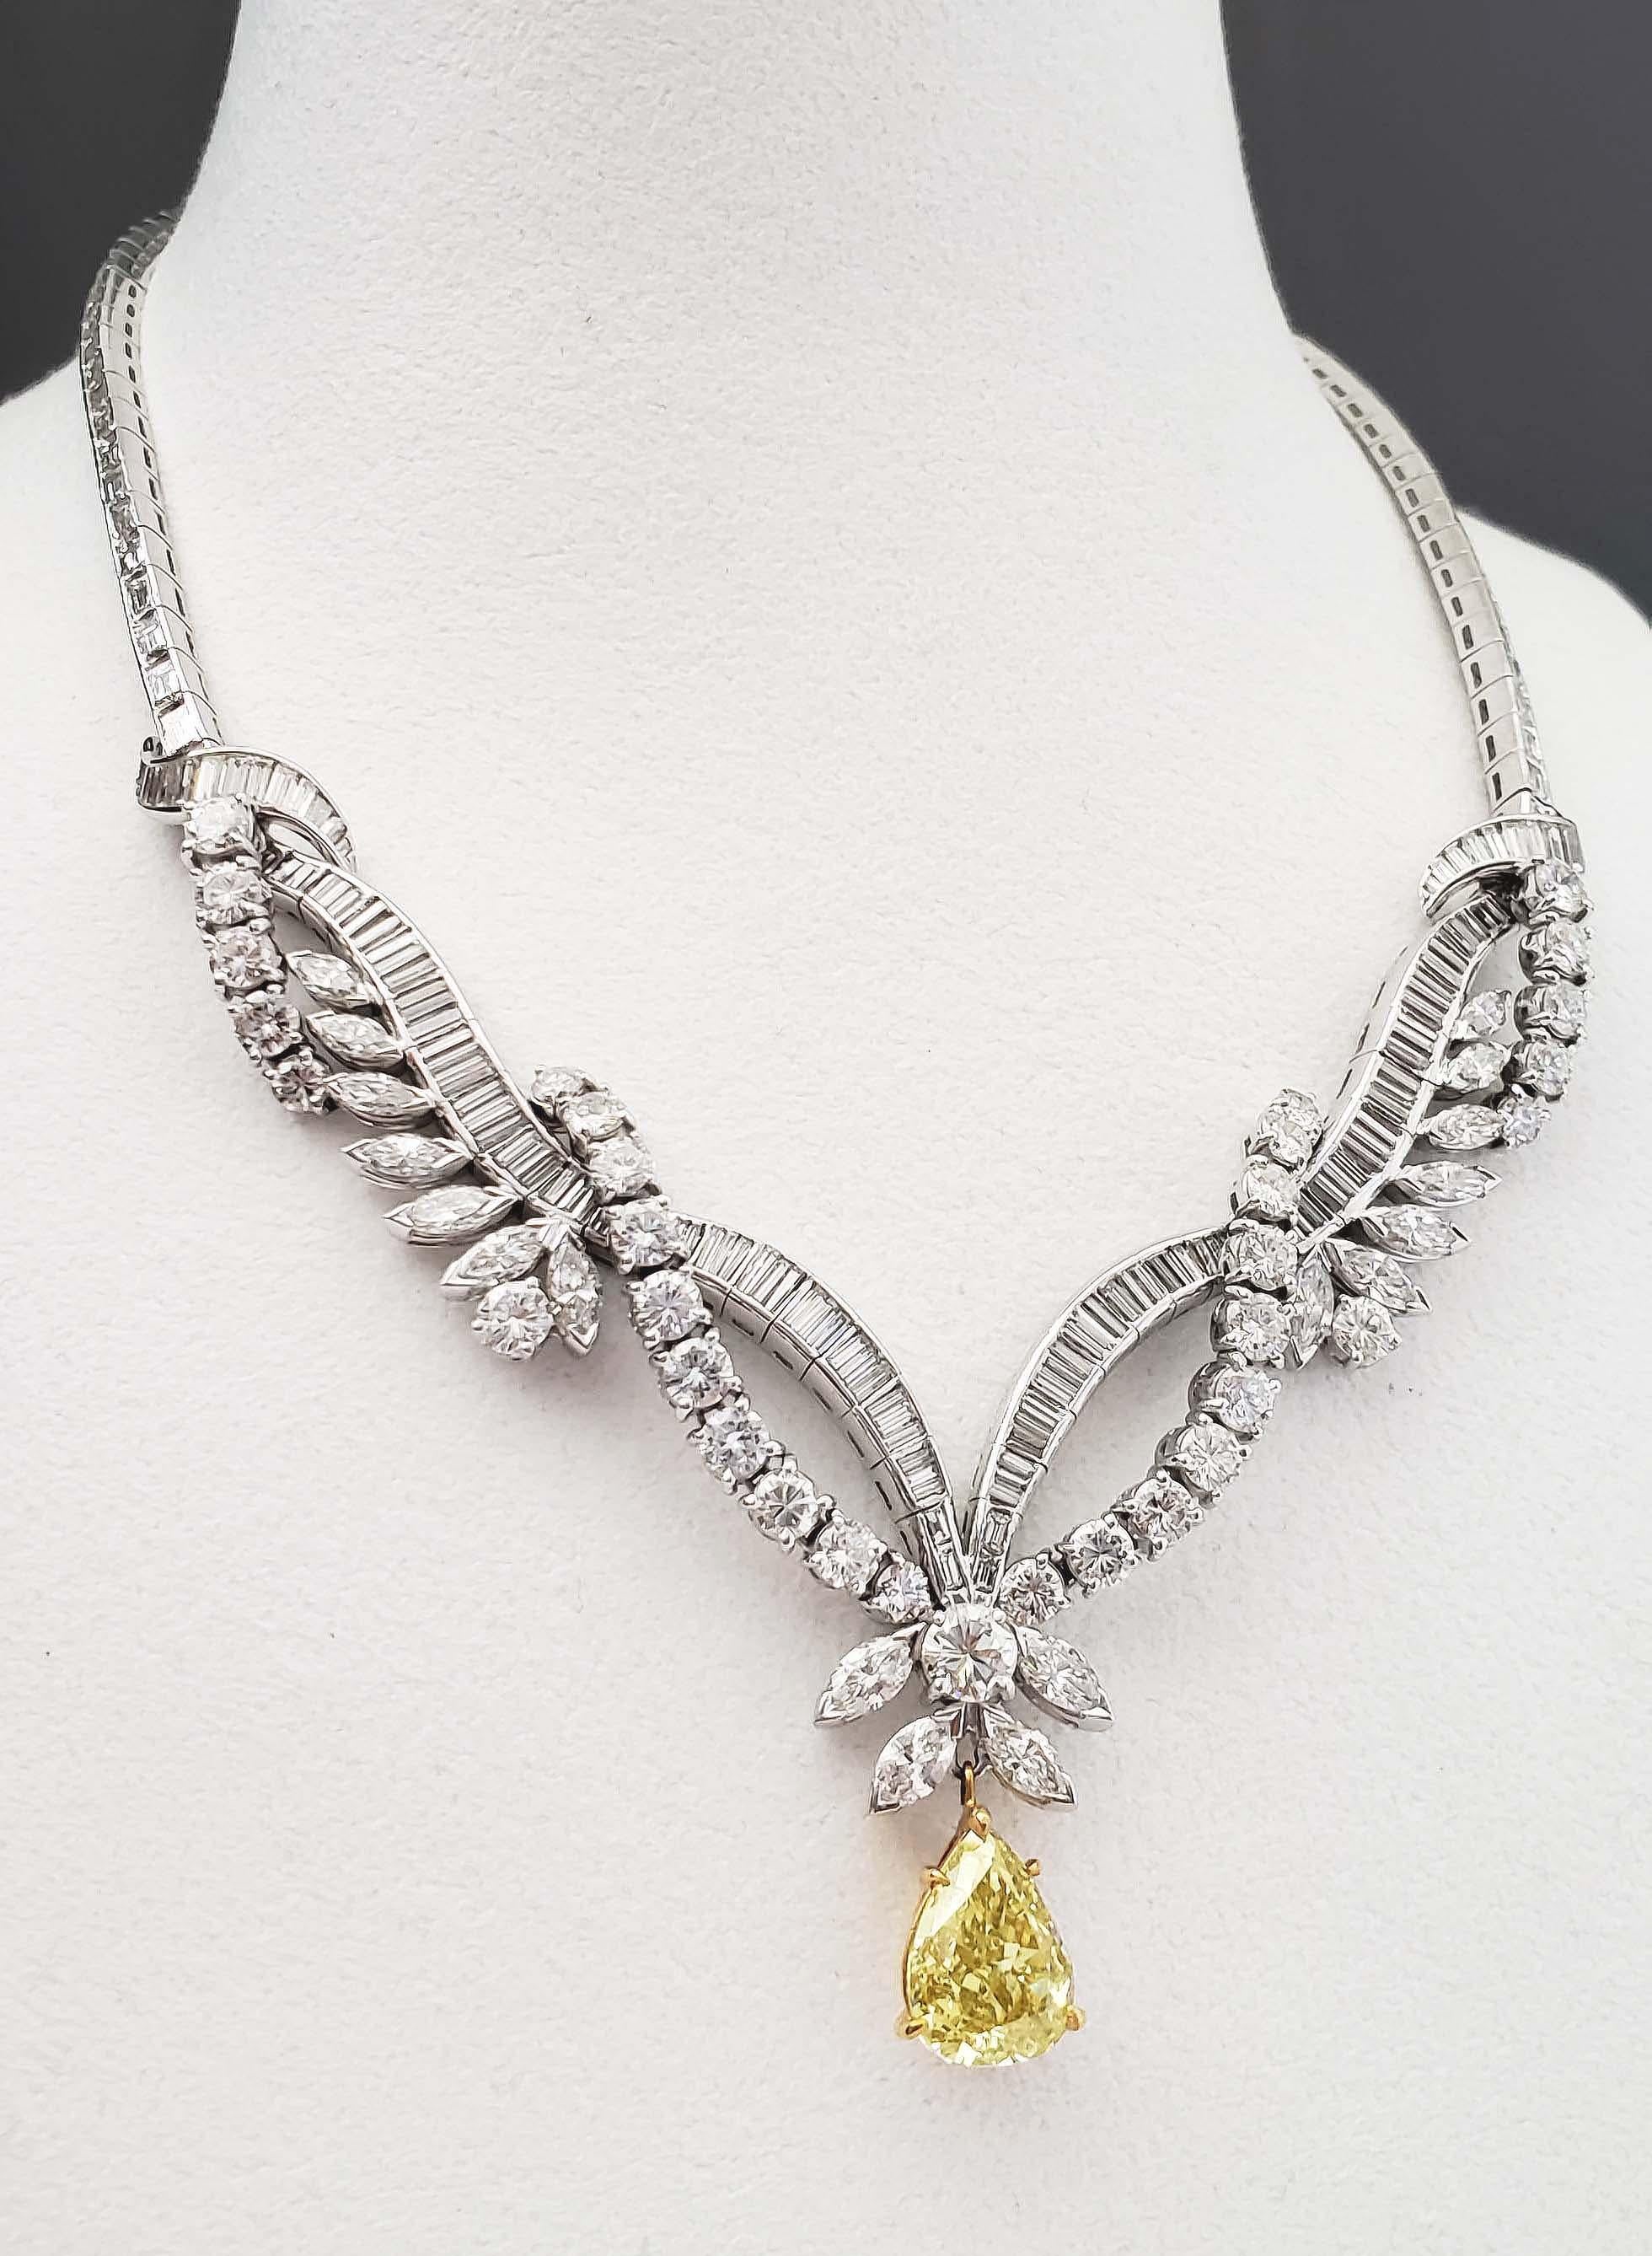 From Scarselli, recognized leaders in the world of natural fancy color diamonds, this enchanting infinity 18k-Platinum necklace with a fancy brownish yellow pear shape 4.15 carat diamond as center stone held by 24 carats of round, baguette and